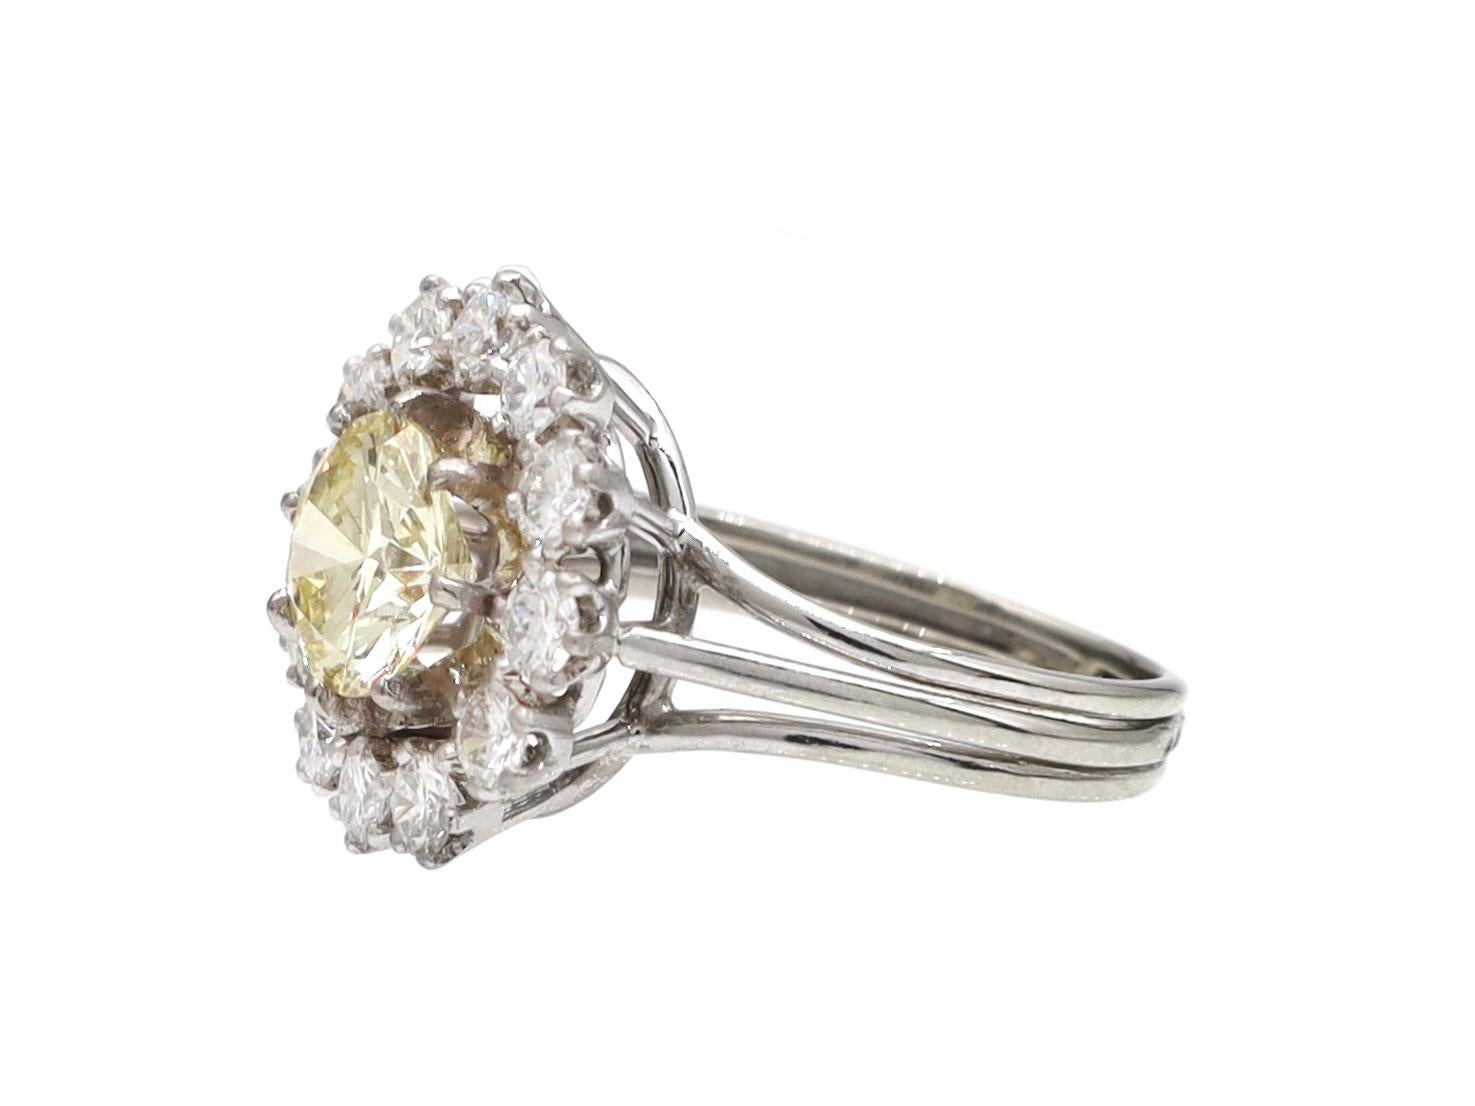 Vintage pale yellow diamond and diamond cluster ring in platinum and 18kt white gold. Centrally set with an estimated 1.18ct round brilliant cut light yellow diamond in a slightly raised claw setting, encircled with a row of round brilliant cut